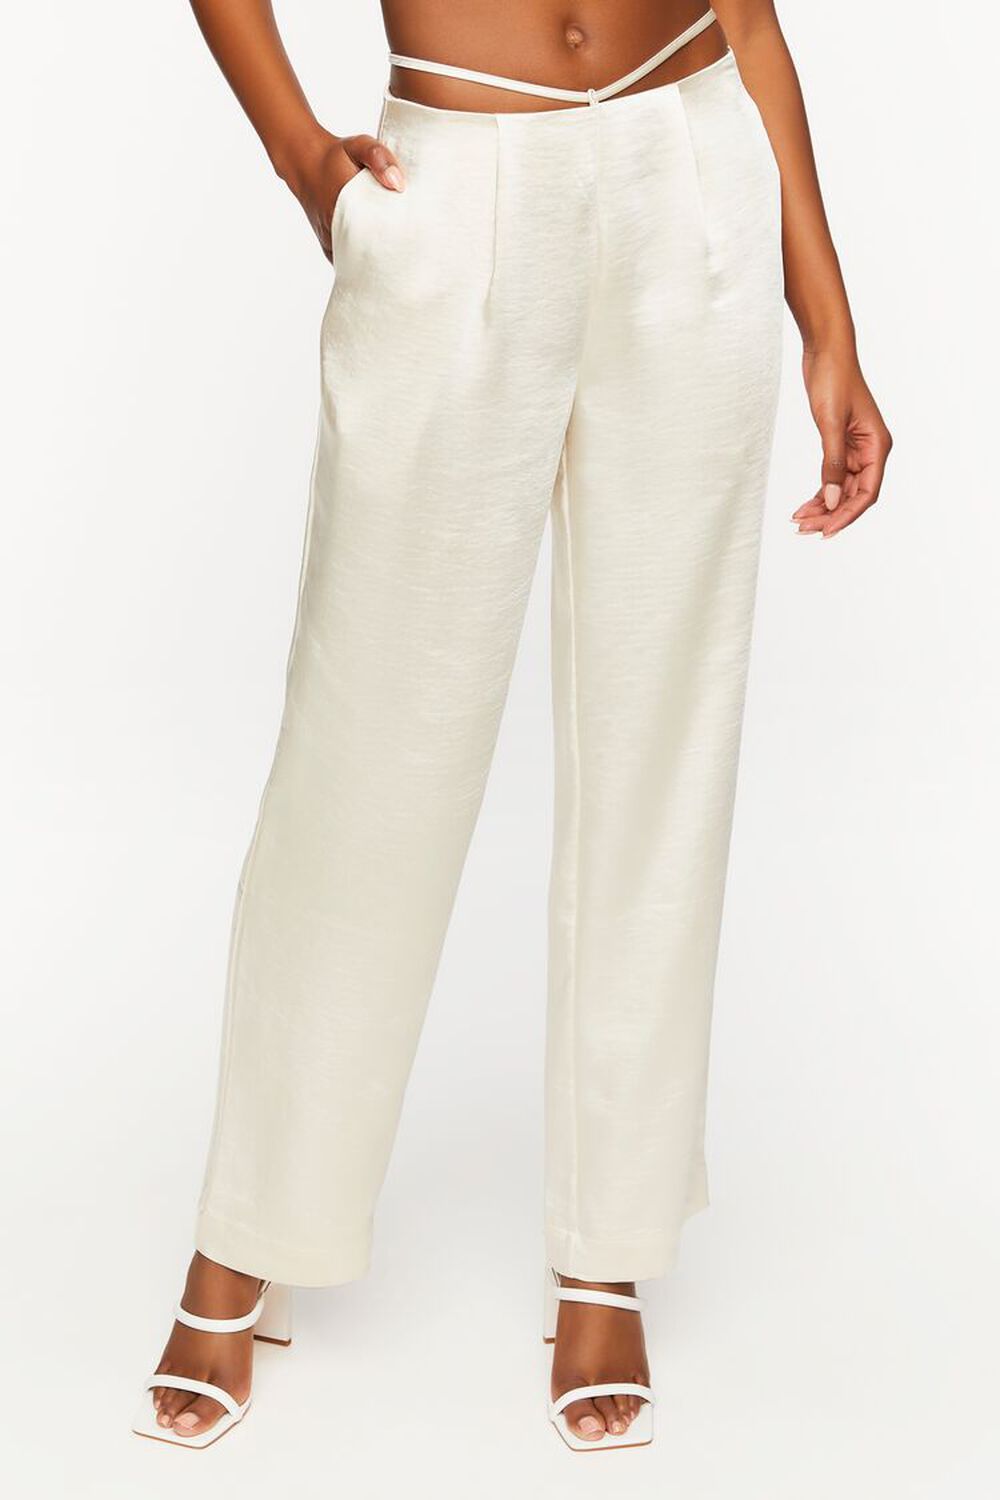 Satin Strappy Mid-Rise Pants, image 2